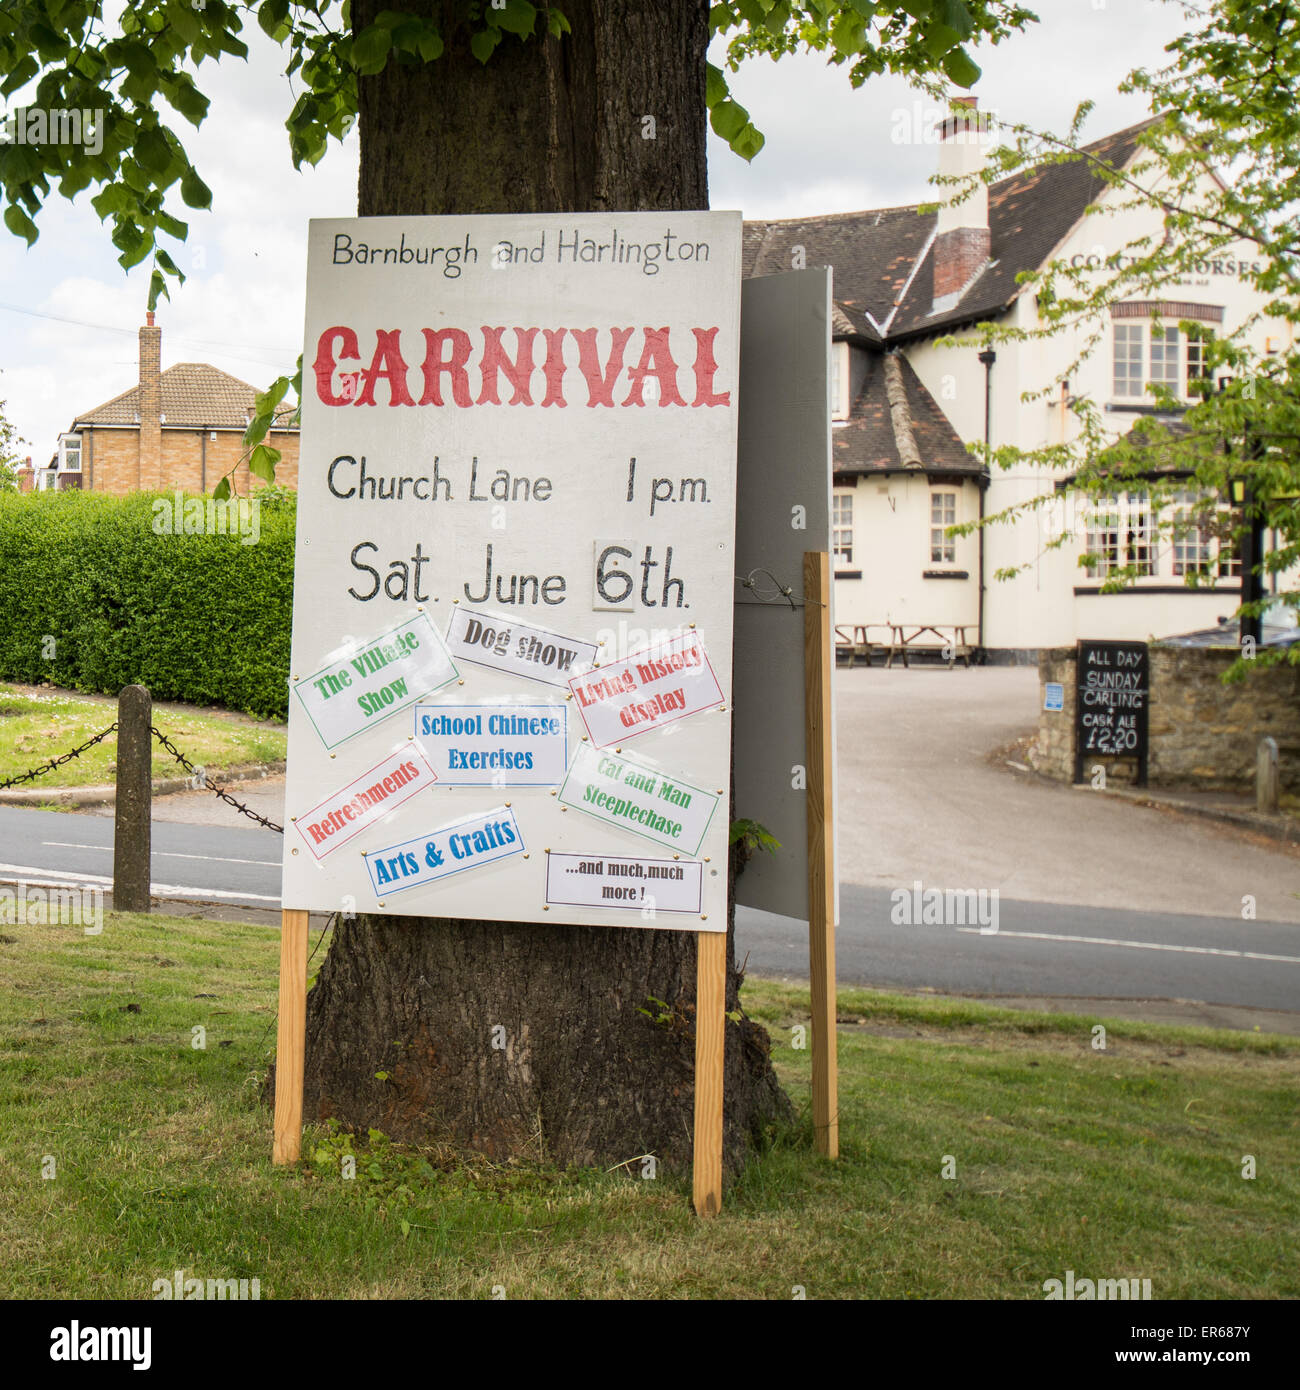 Sign in the village of Barnburgh advertising traditional village carnival of Barnburgh and Harlington,  South Yorkshire, England Stock Photo